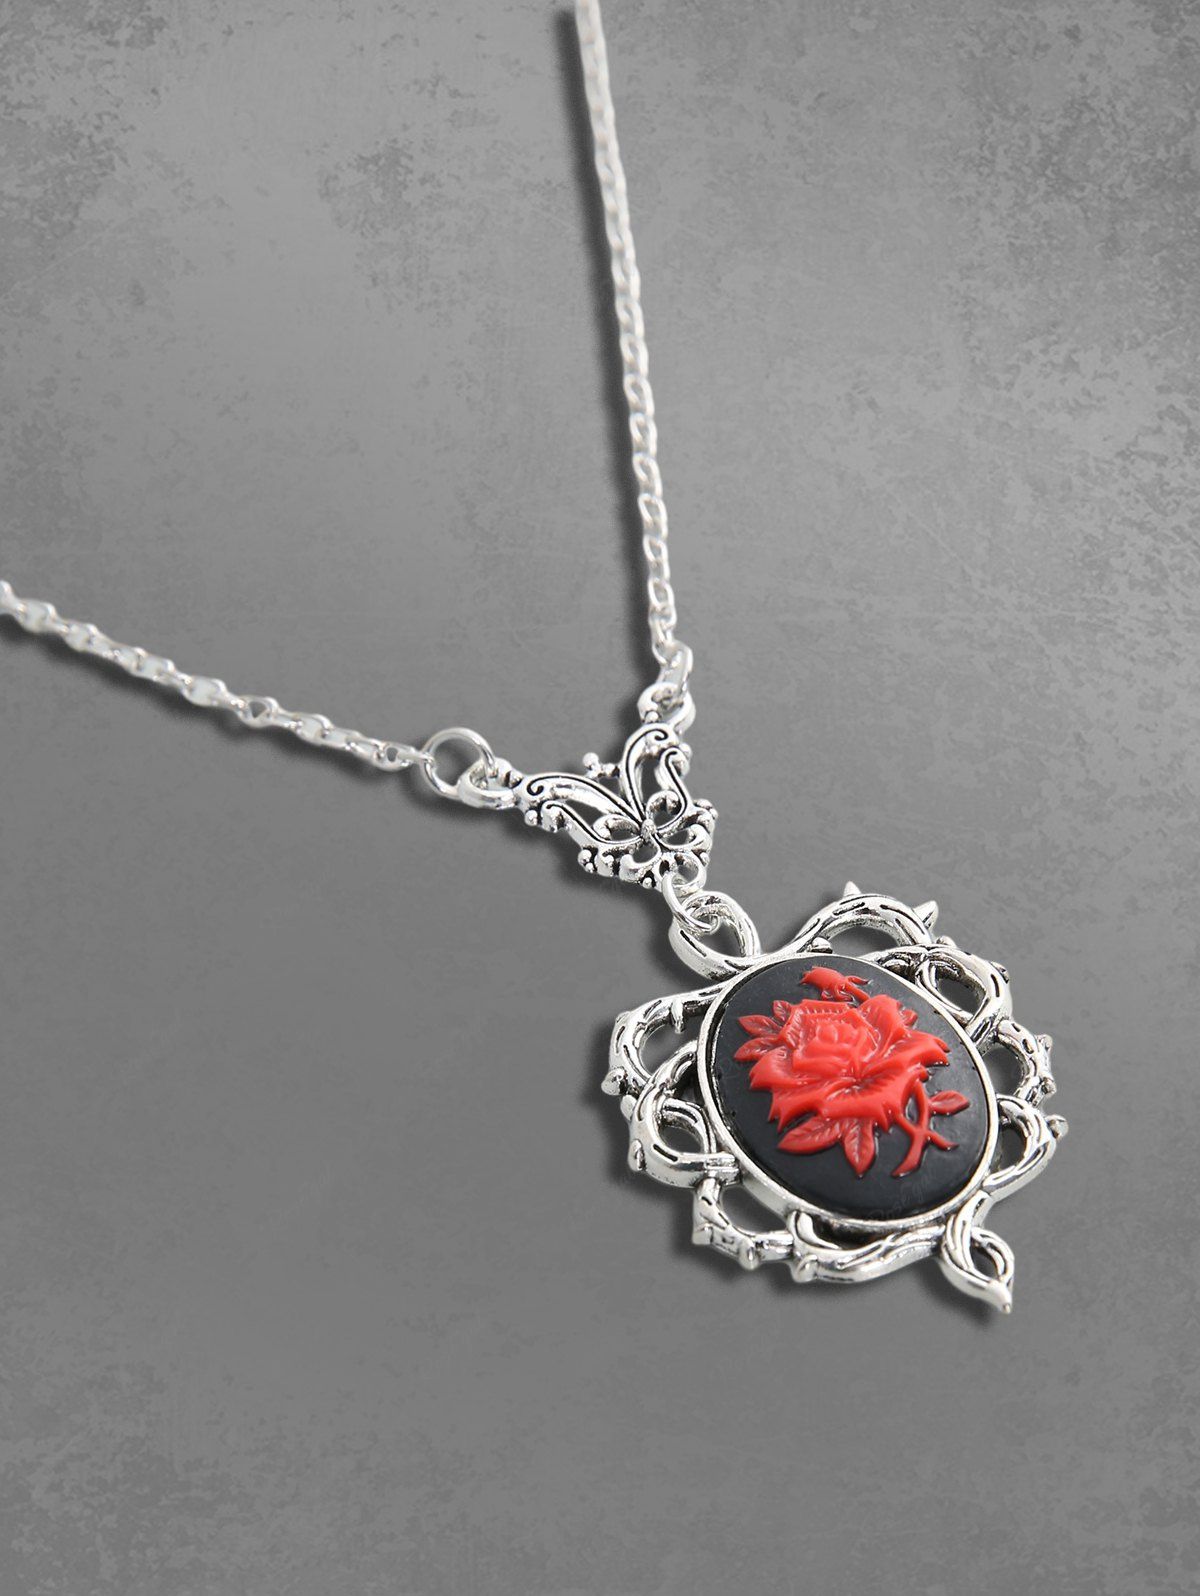 Gothic Thorn Rose Flower Pendant Necklace